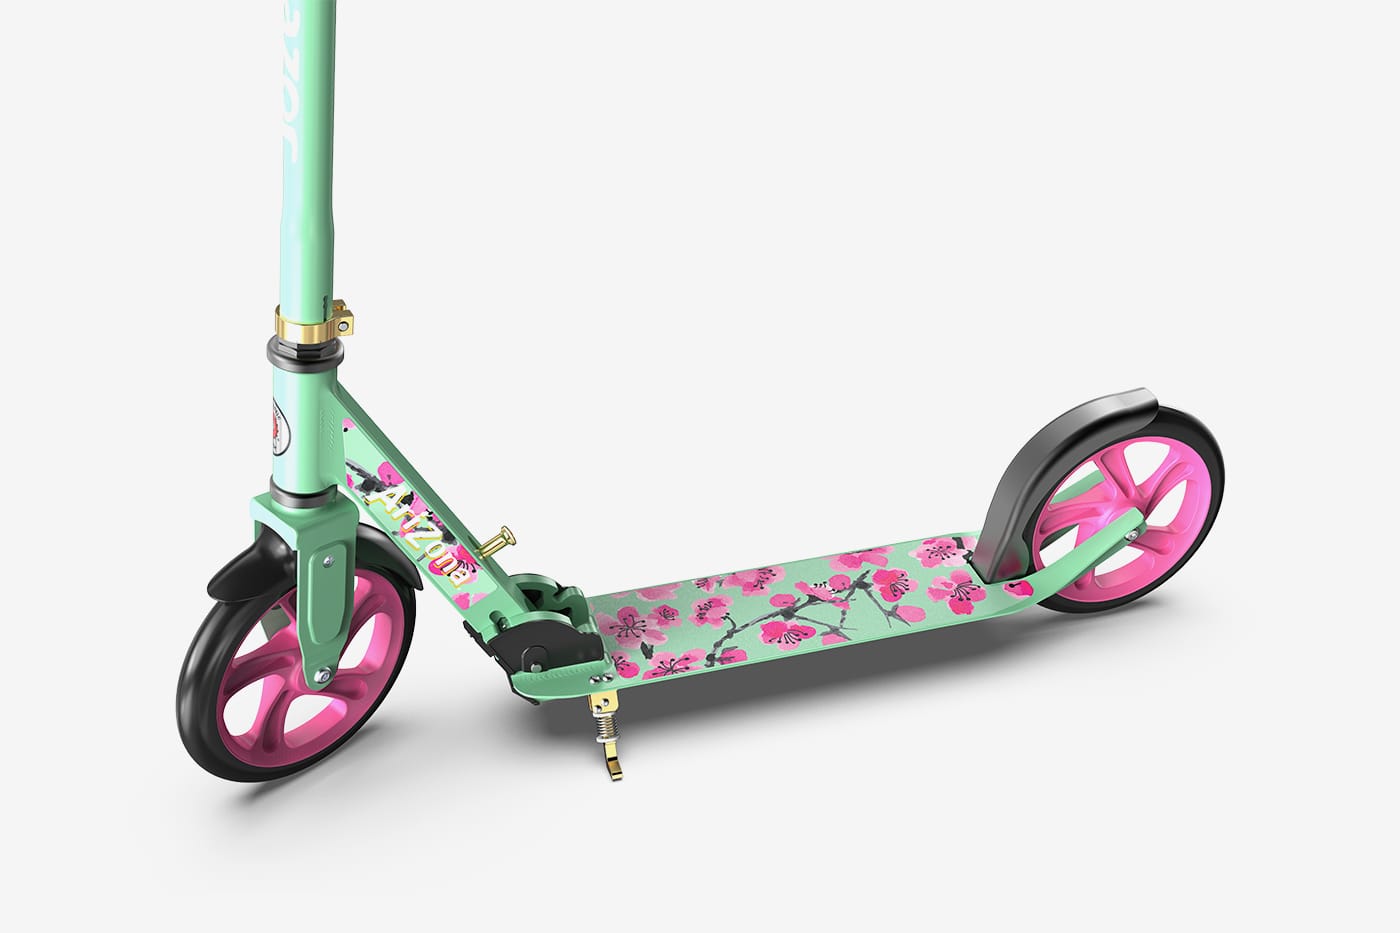 hot pink razor scooter